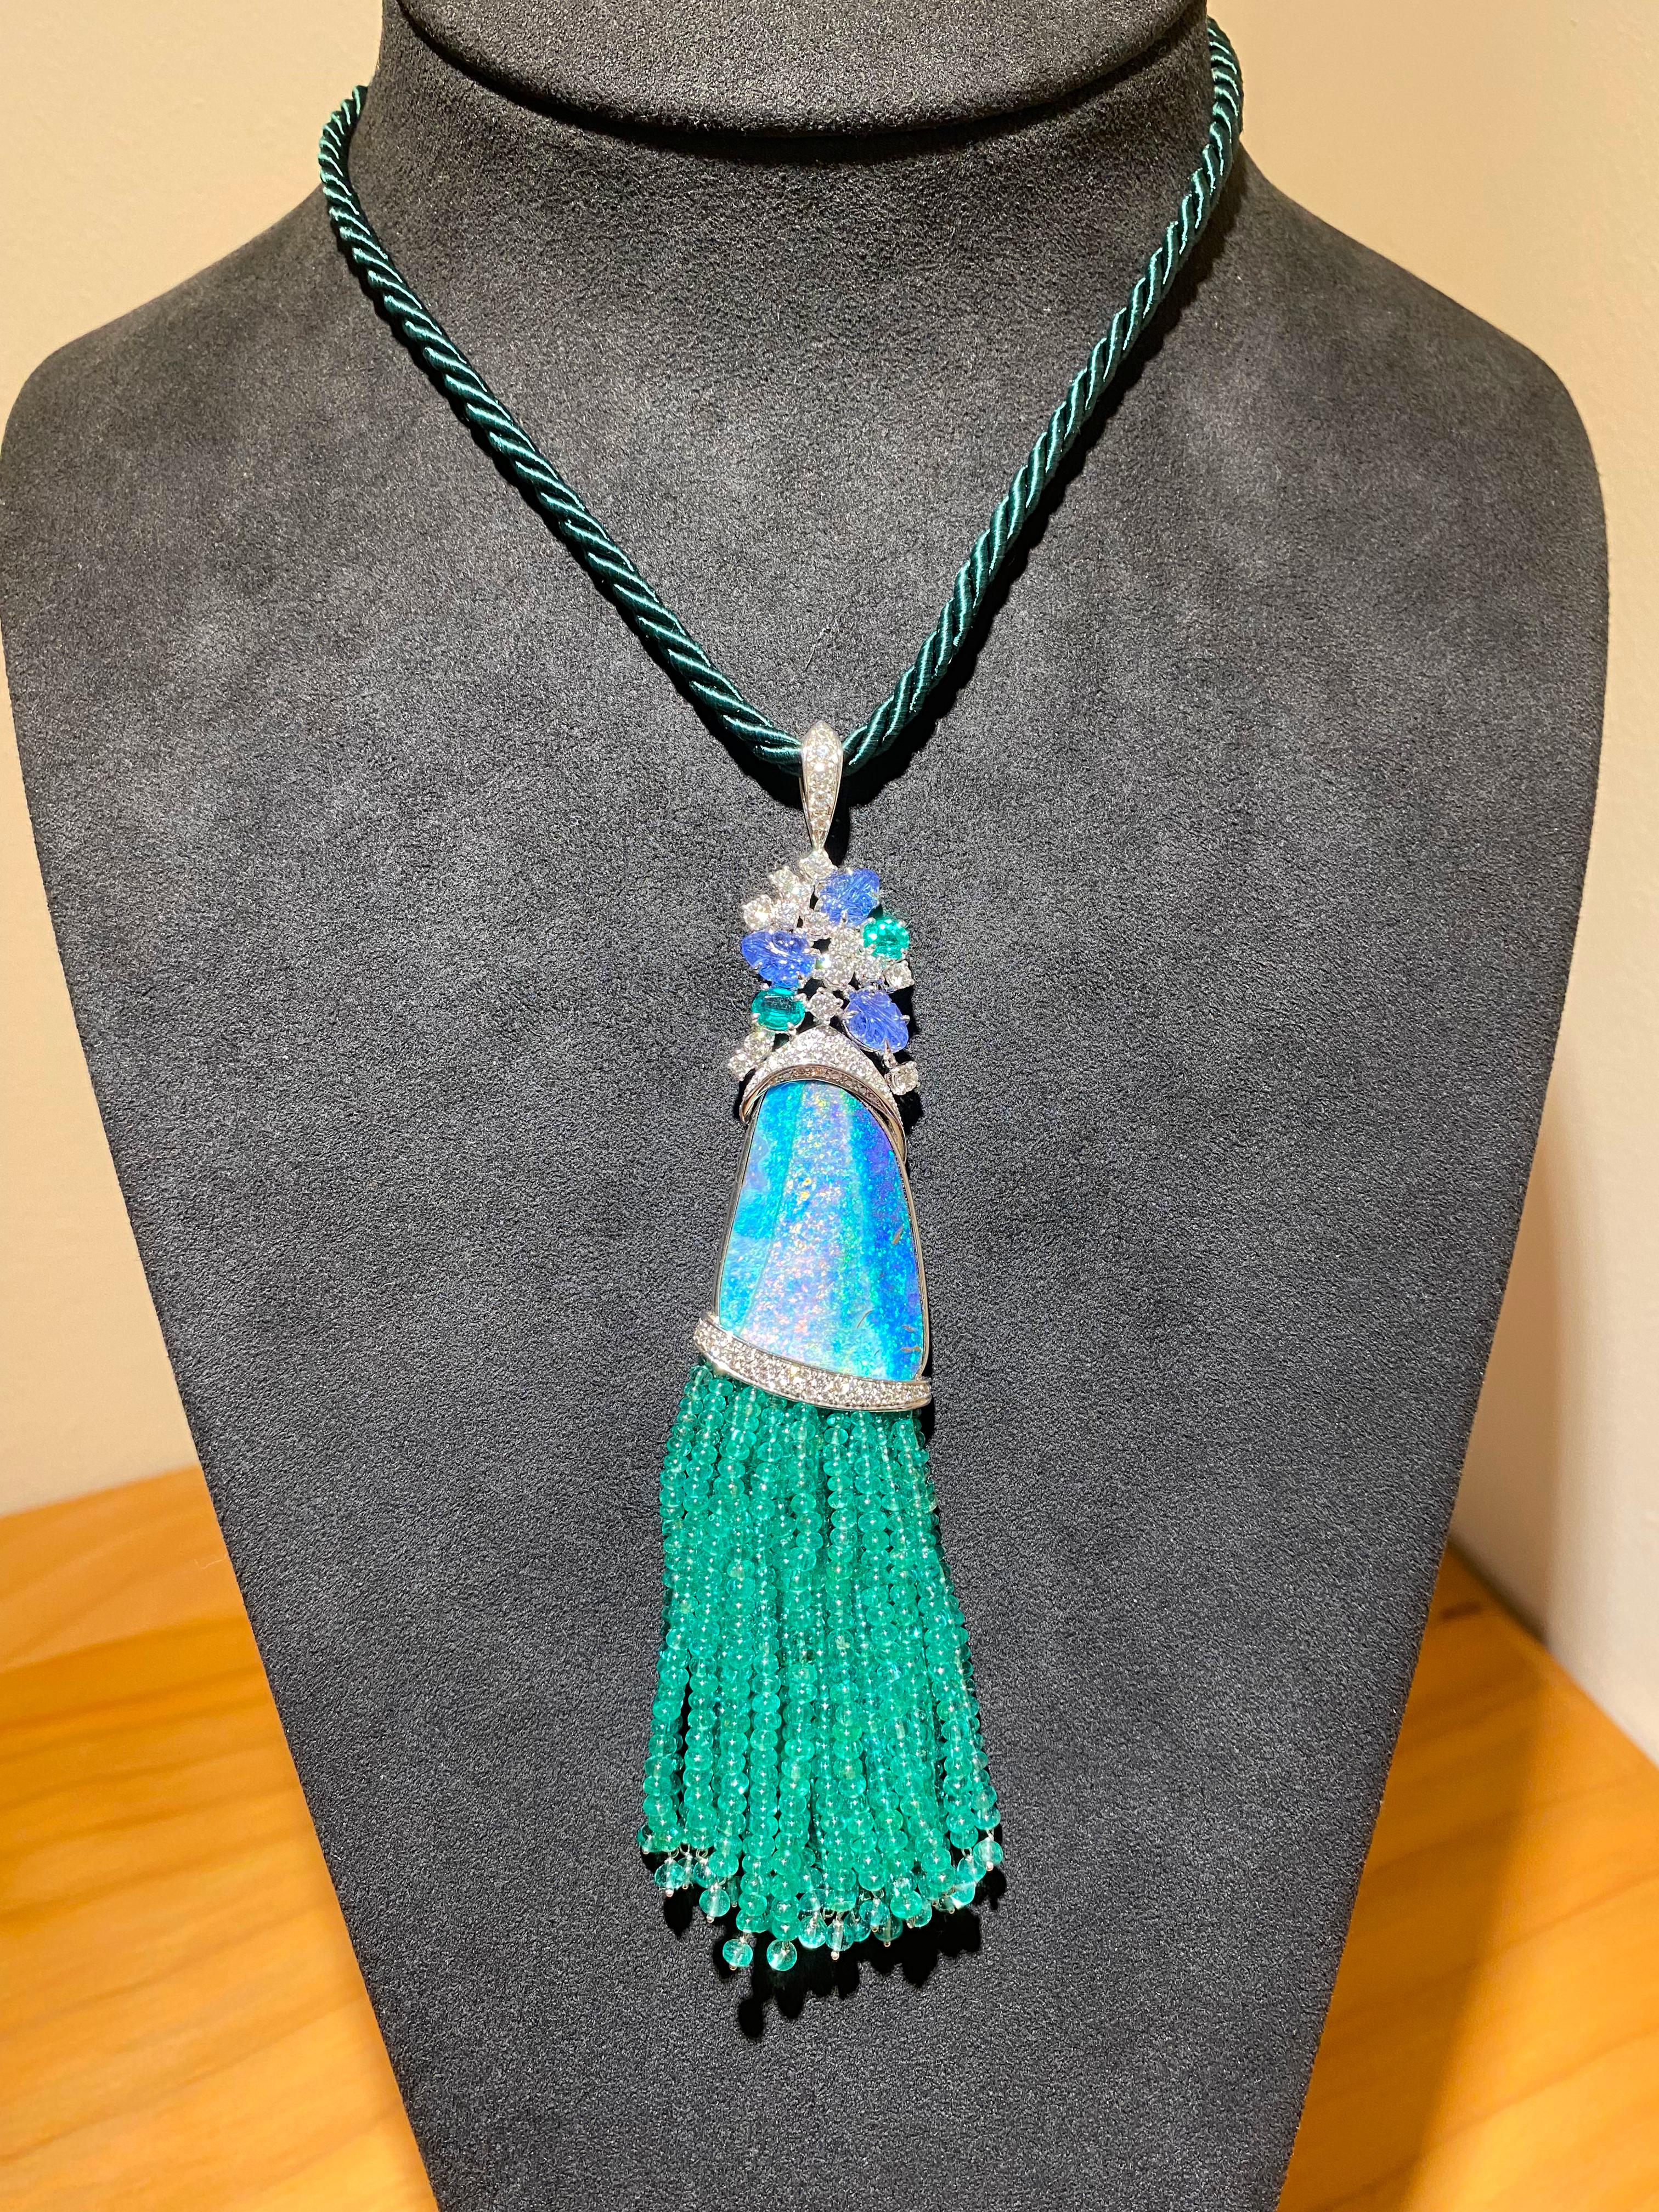 Introducing a truly mesmerizing Pendant Necklace that effortlessly captures the essence of the oceanic beauty and lush greenery. This exquisite piece, a creation of the master Italian jeweler Fulvio Maria Scavia, showcases a stunning Australian blue